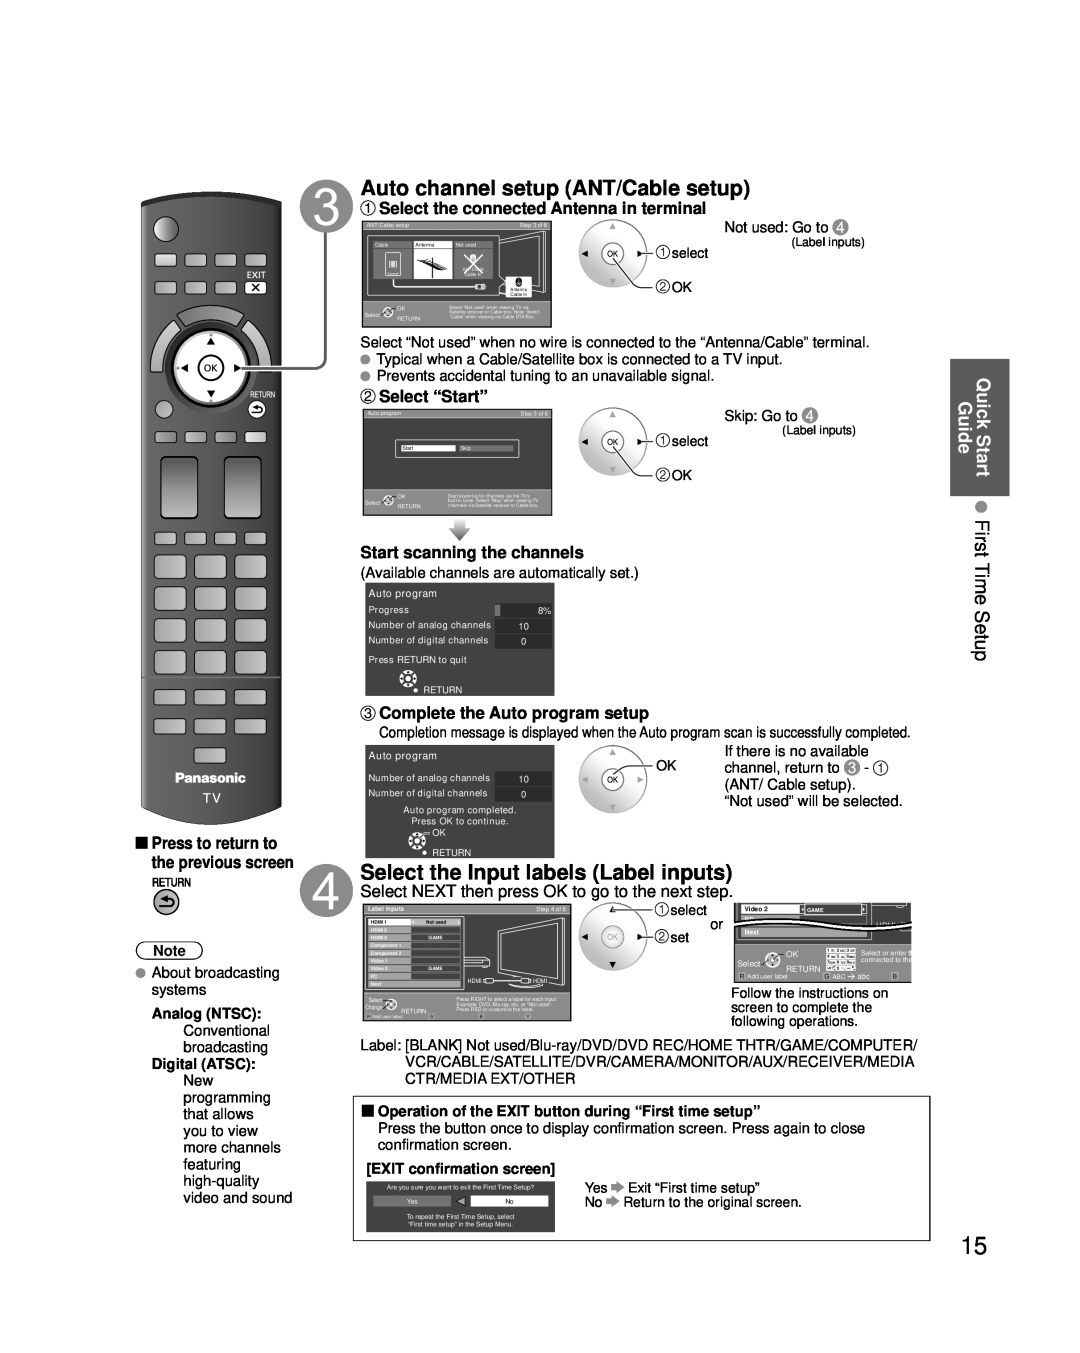 Panasonic TC-P54G25 Select the connected Antenna in terminal, Select “Start”, Start scanning the channels, Not used Go to 